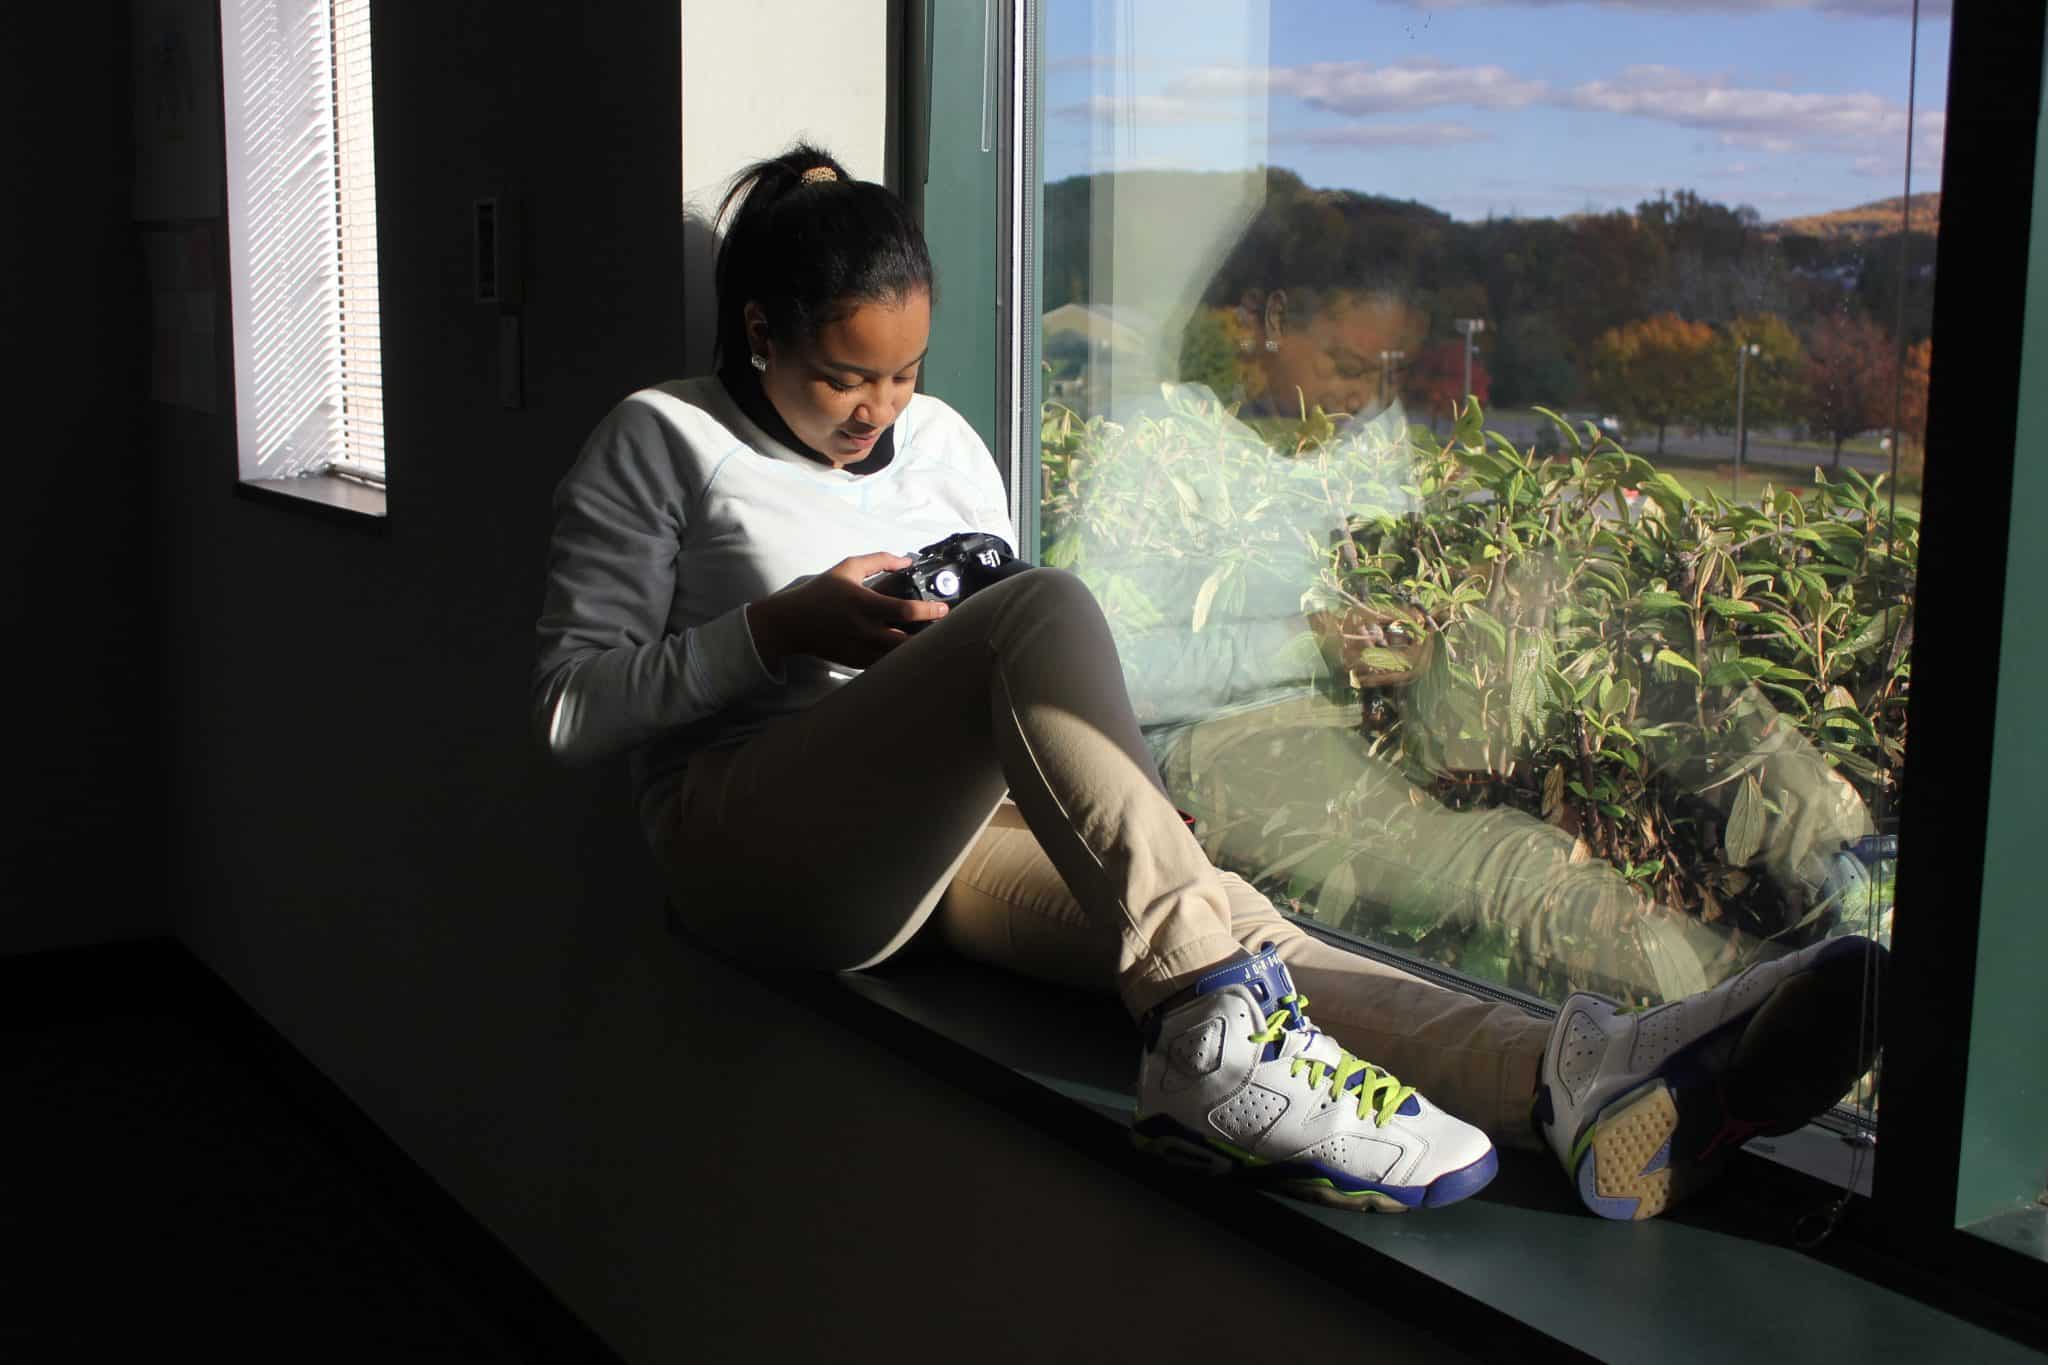 Student Sitting on Window Seat and Looking at a Camera